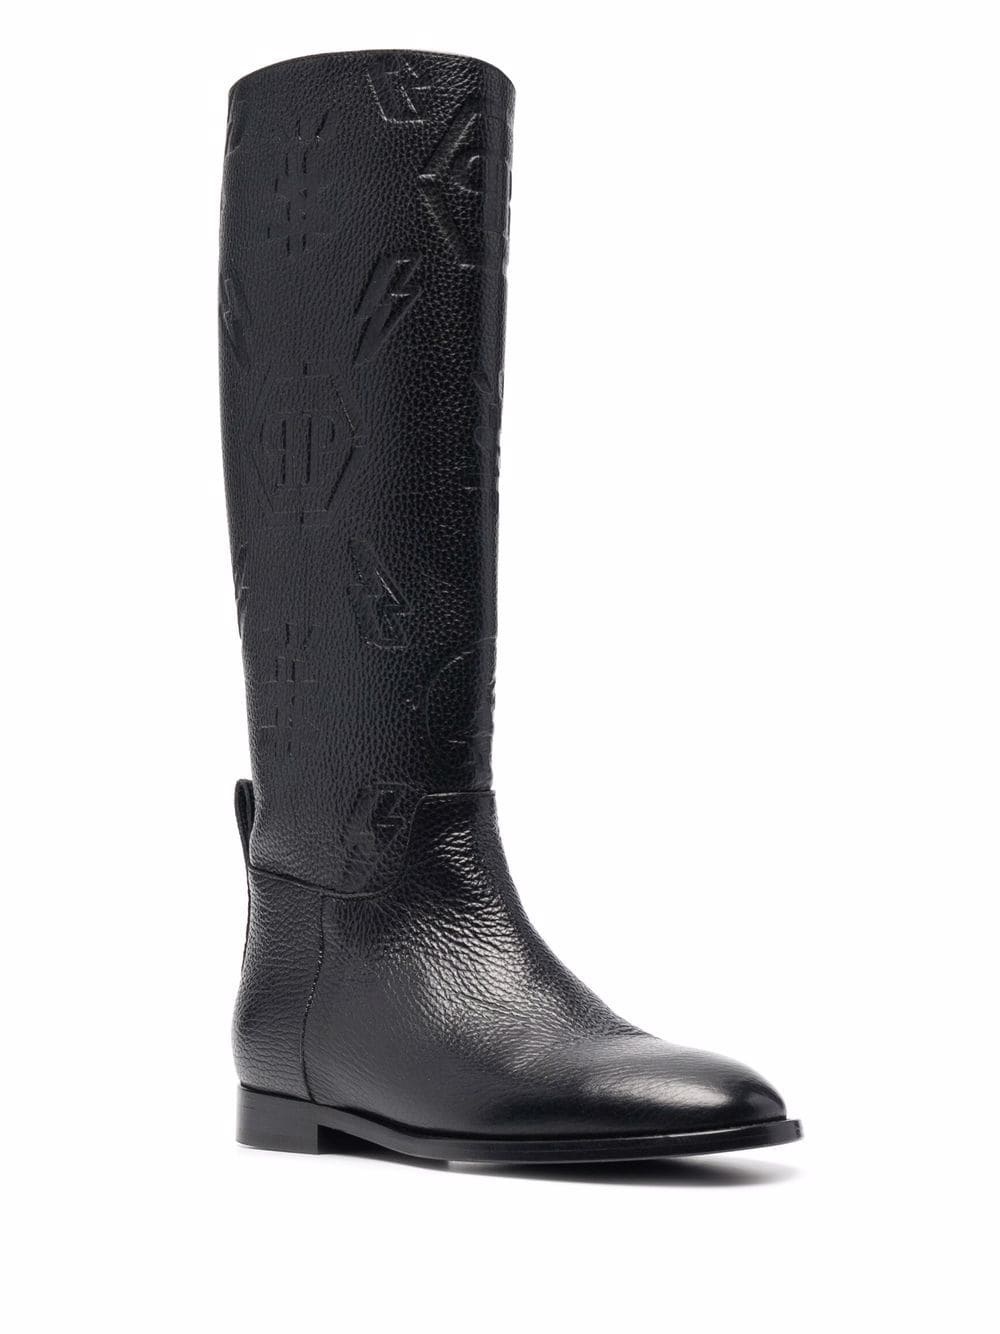 embossed-logo knee-high boots - 2